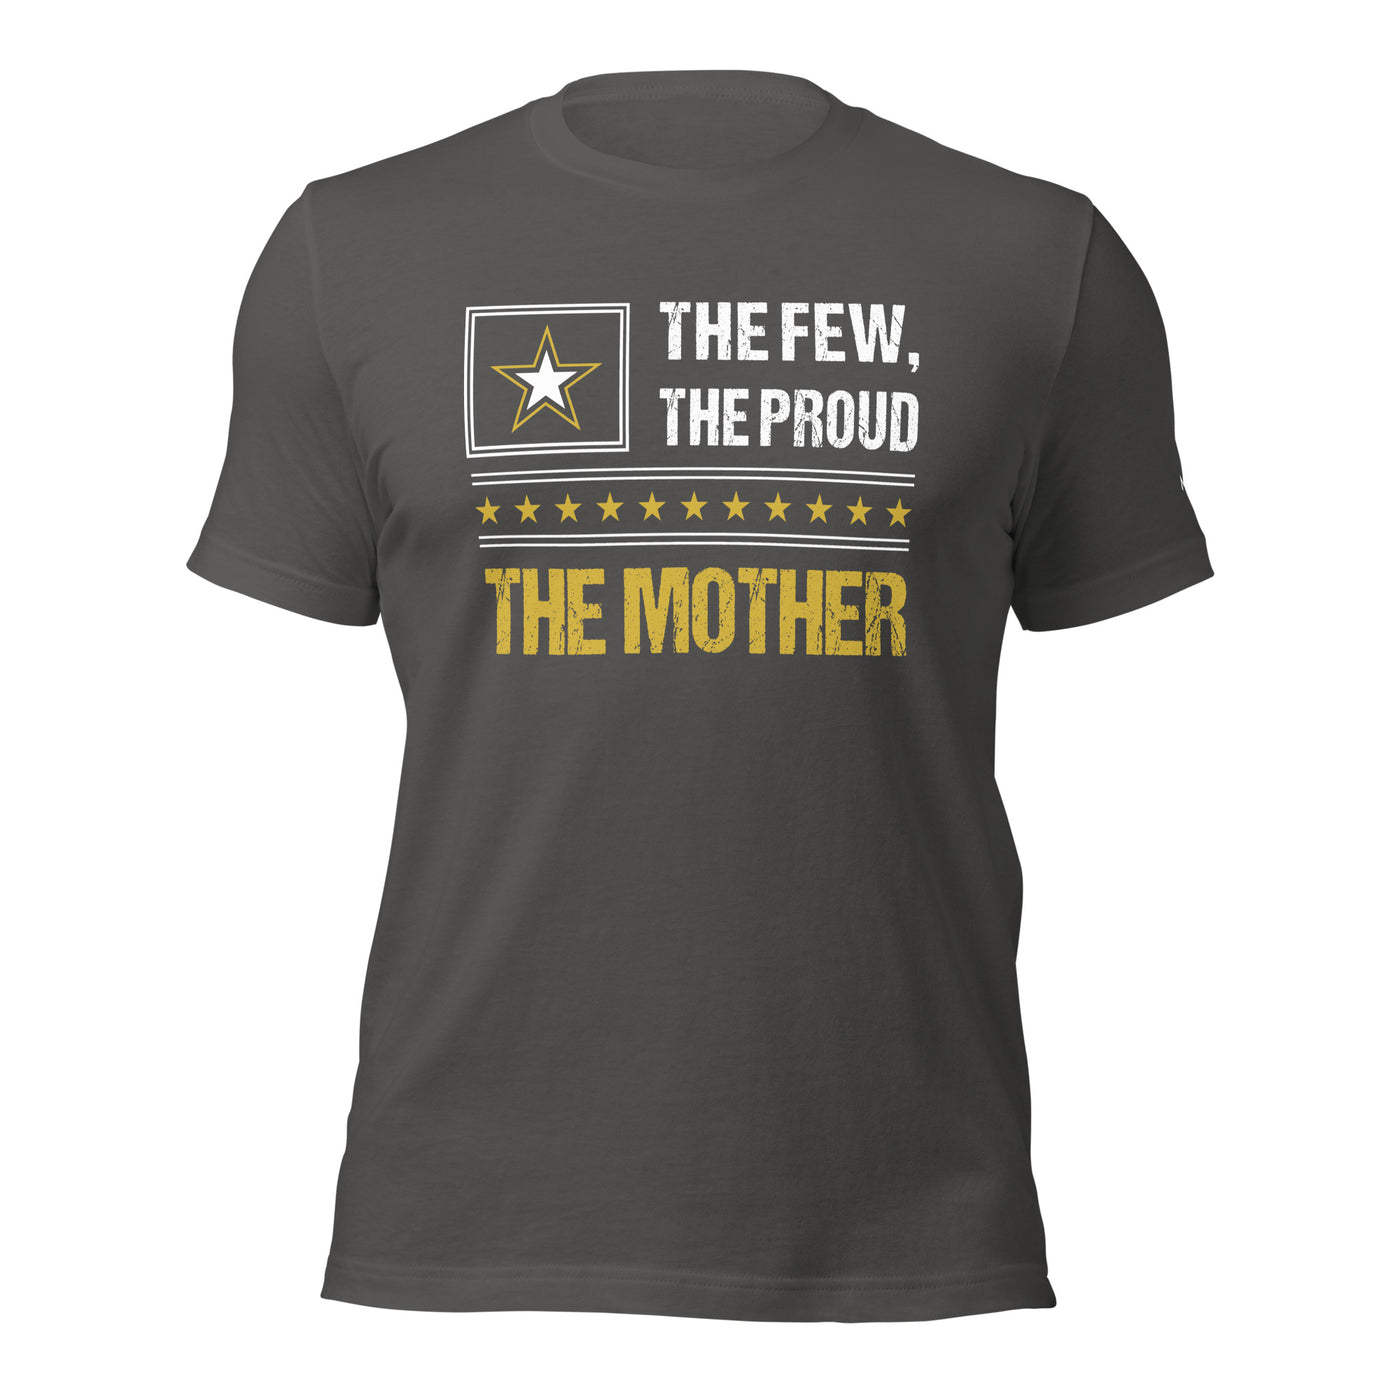 The few, the proud, the Mother - Unisex t-shirt